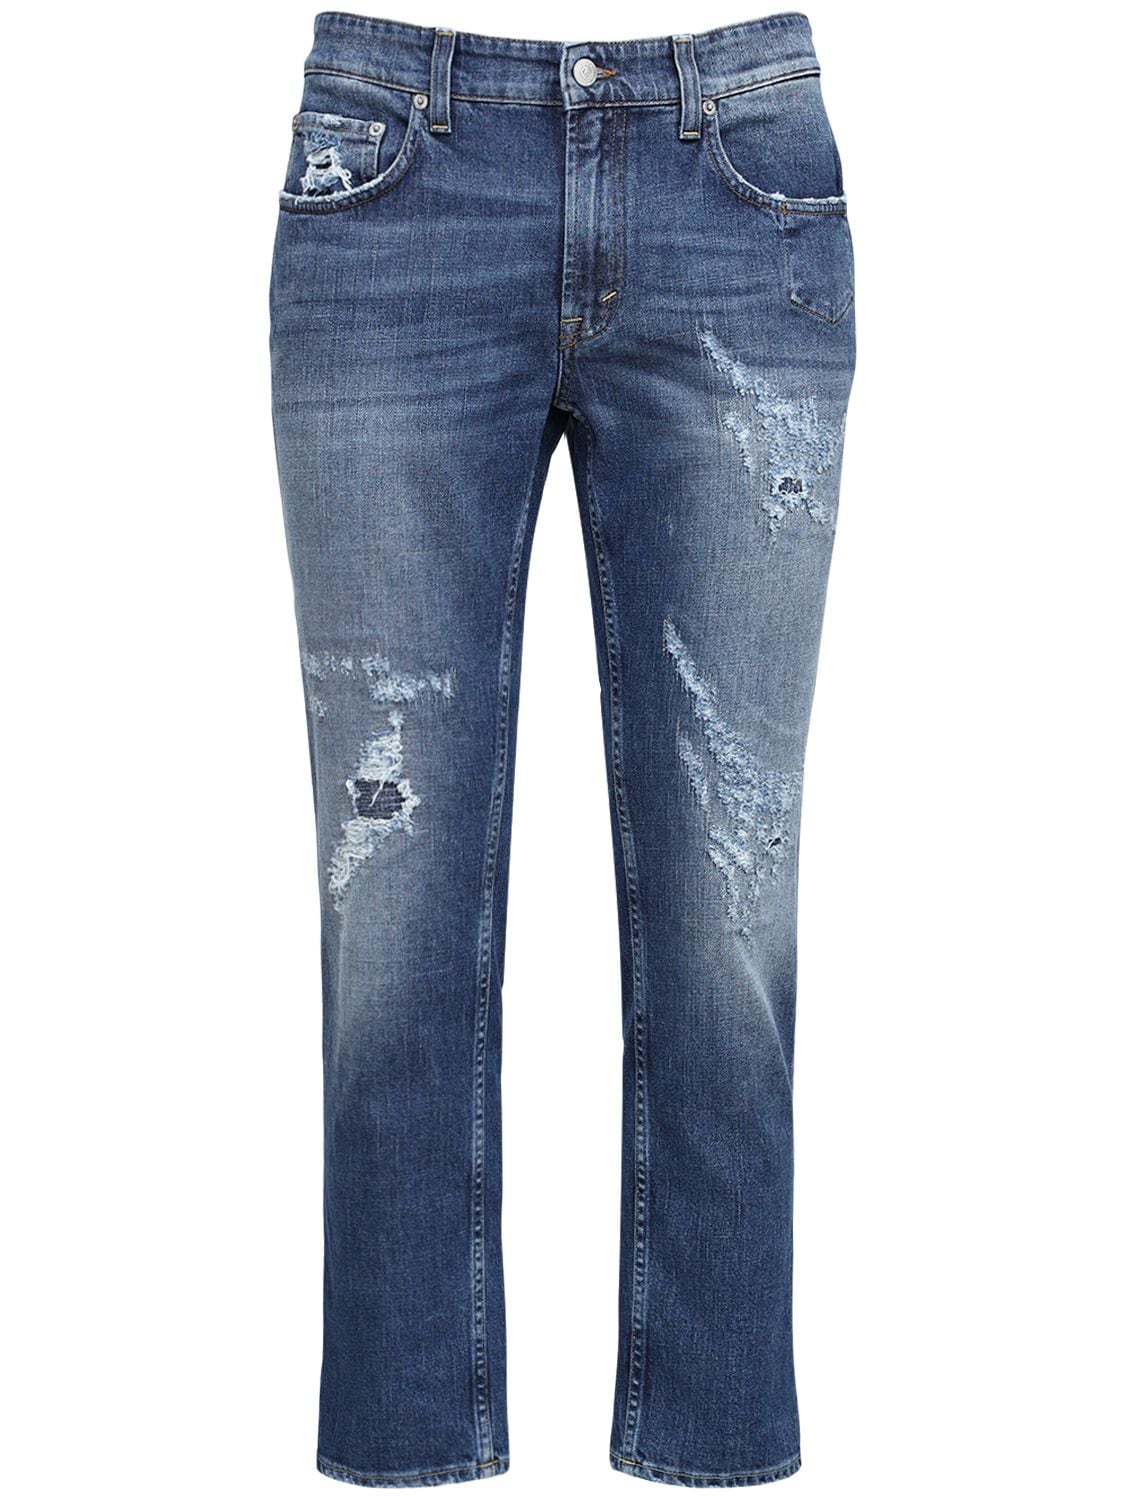 Department Five Wide Leg Jeans W/ Distressed Details In Blue